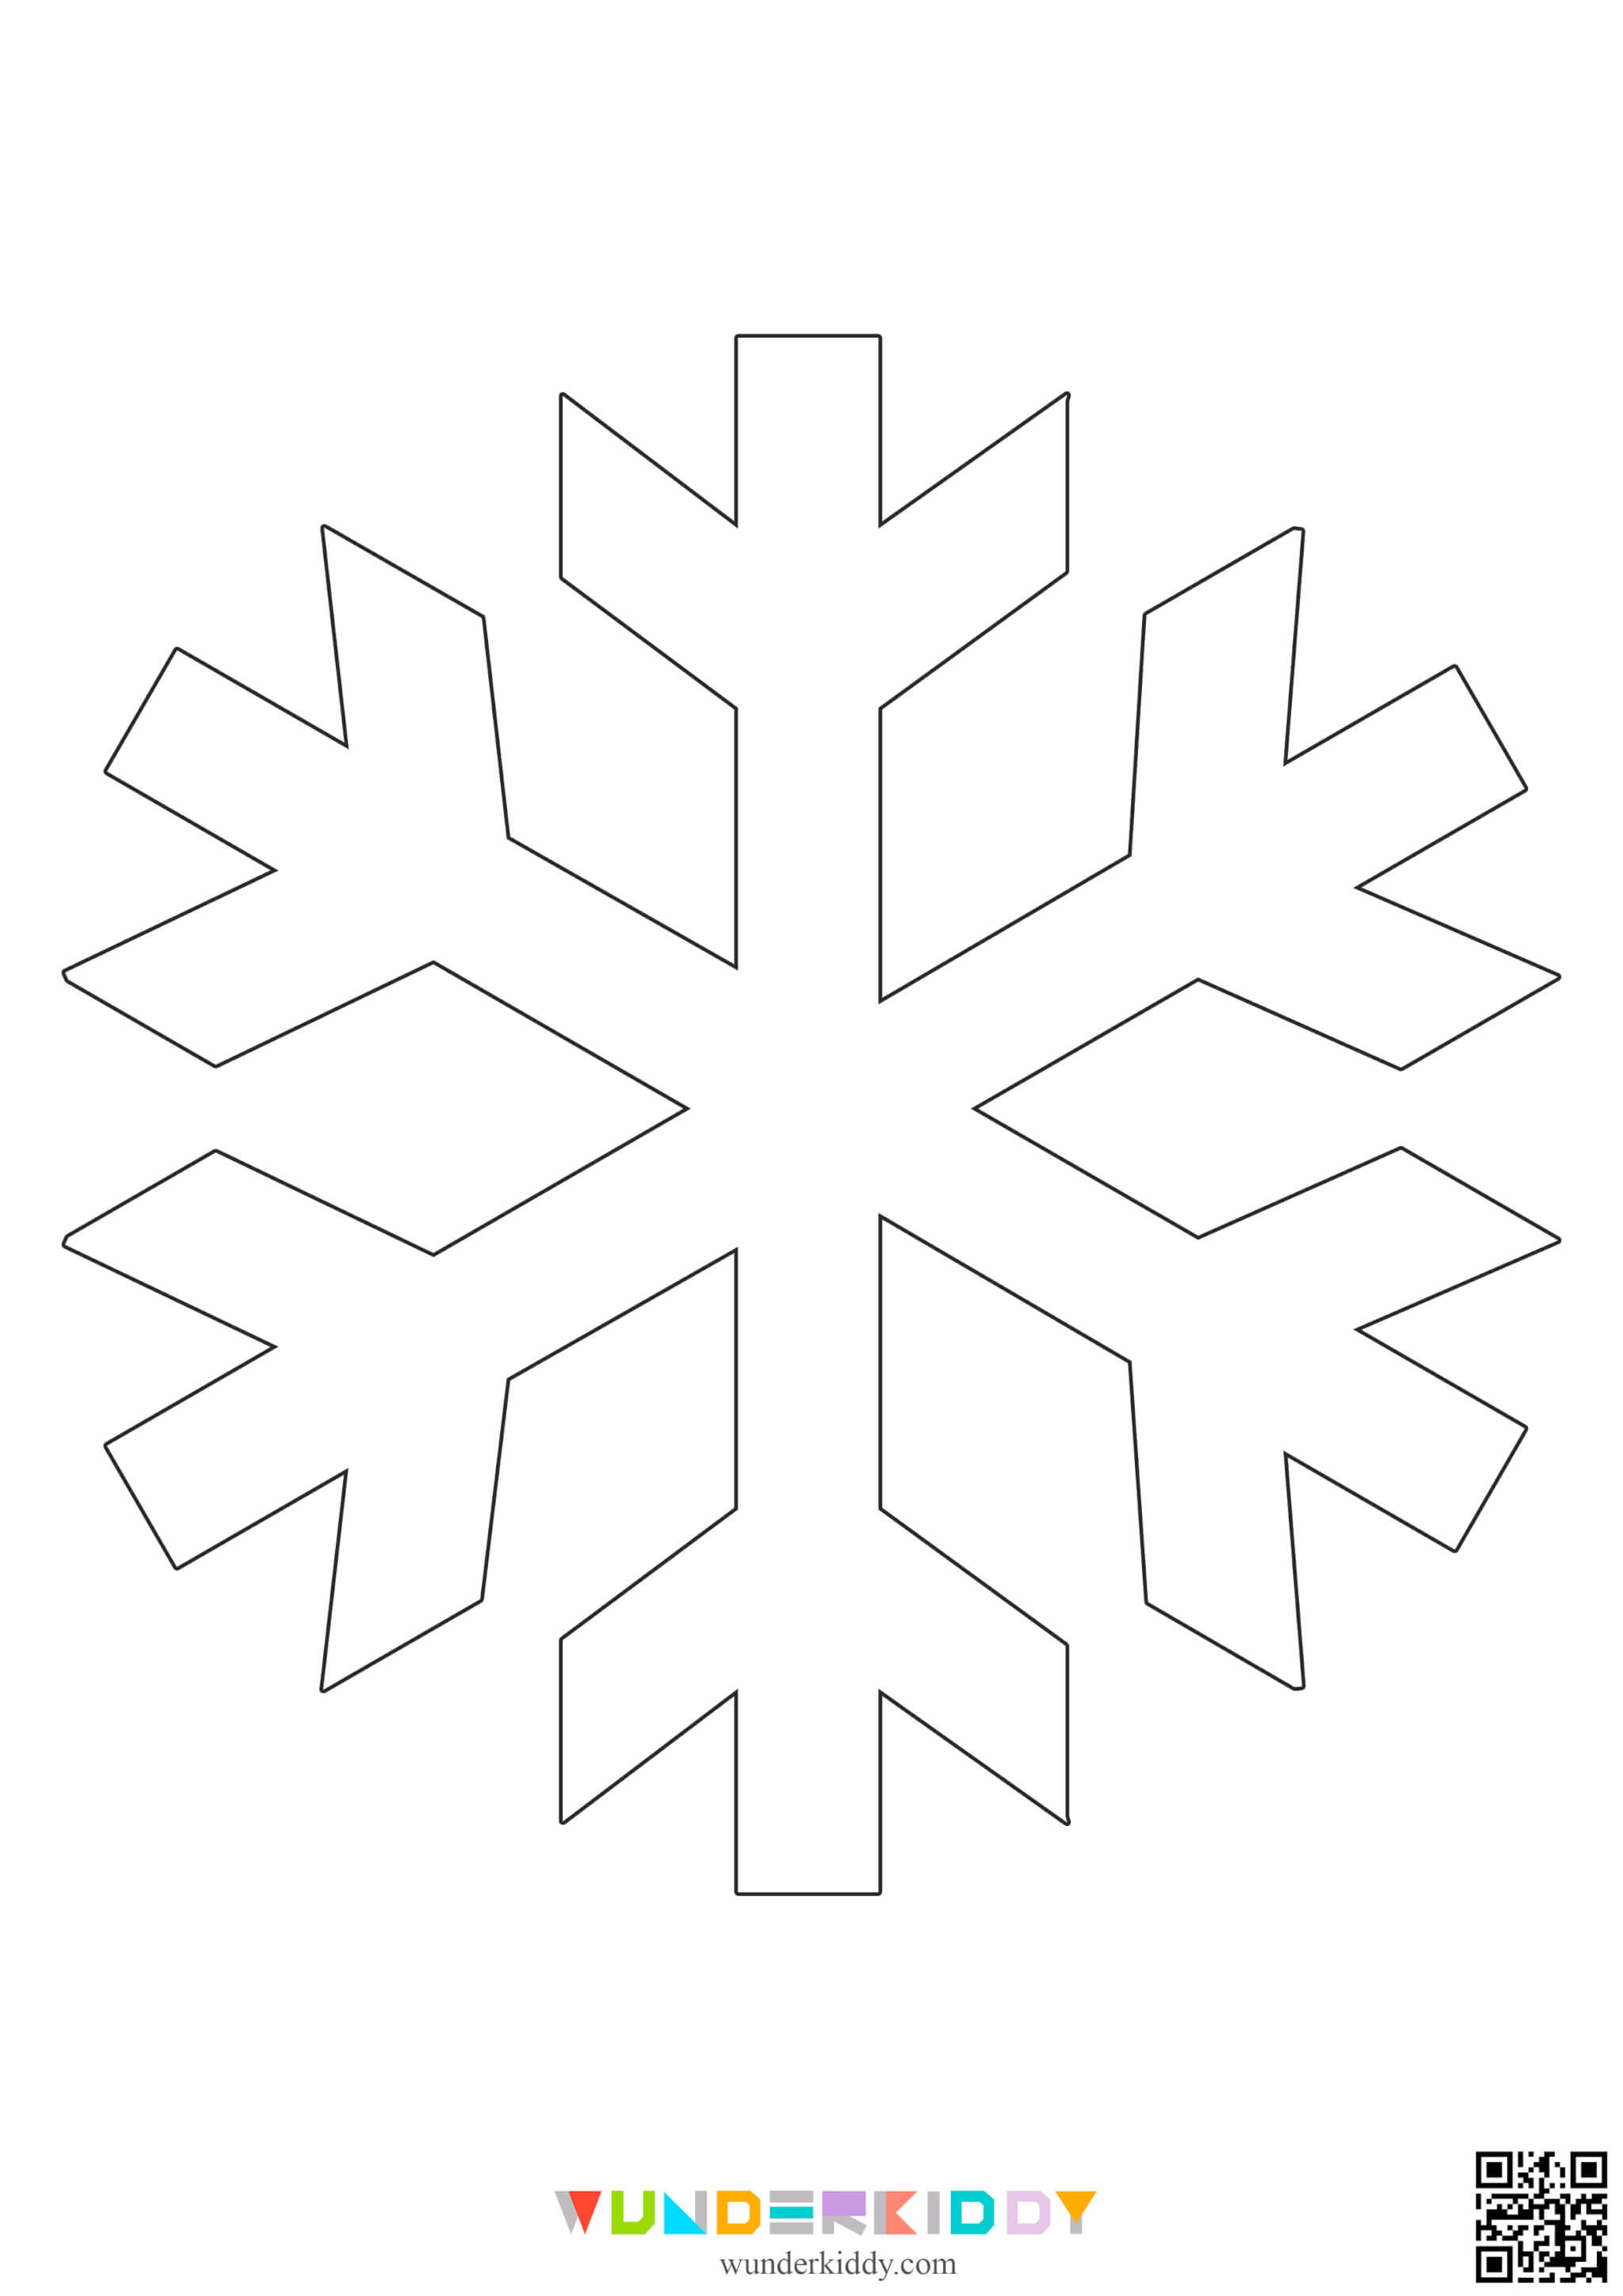 Snowflakes Template - Image 14